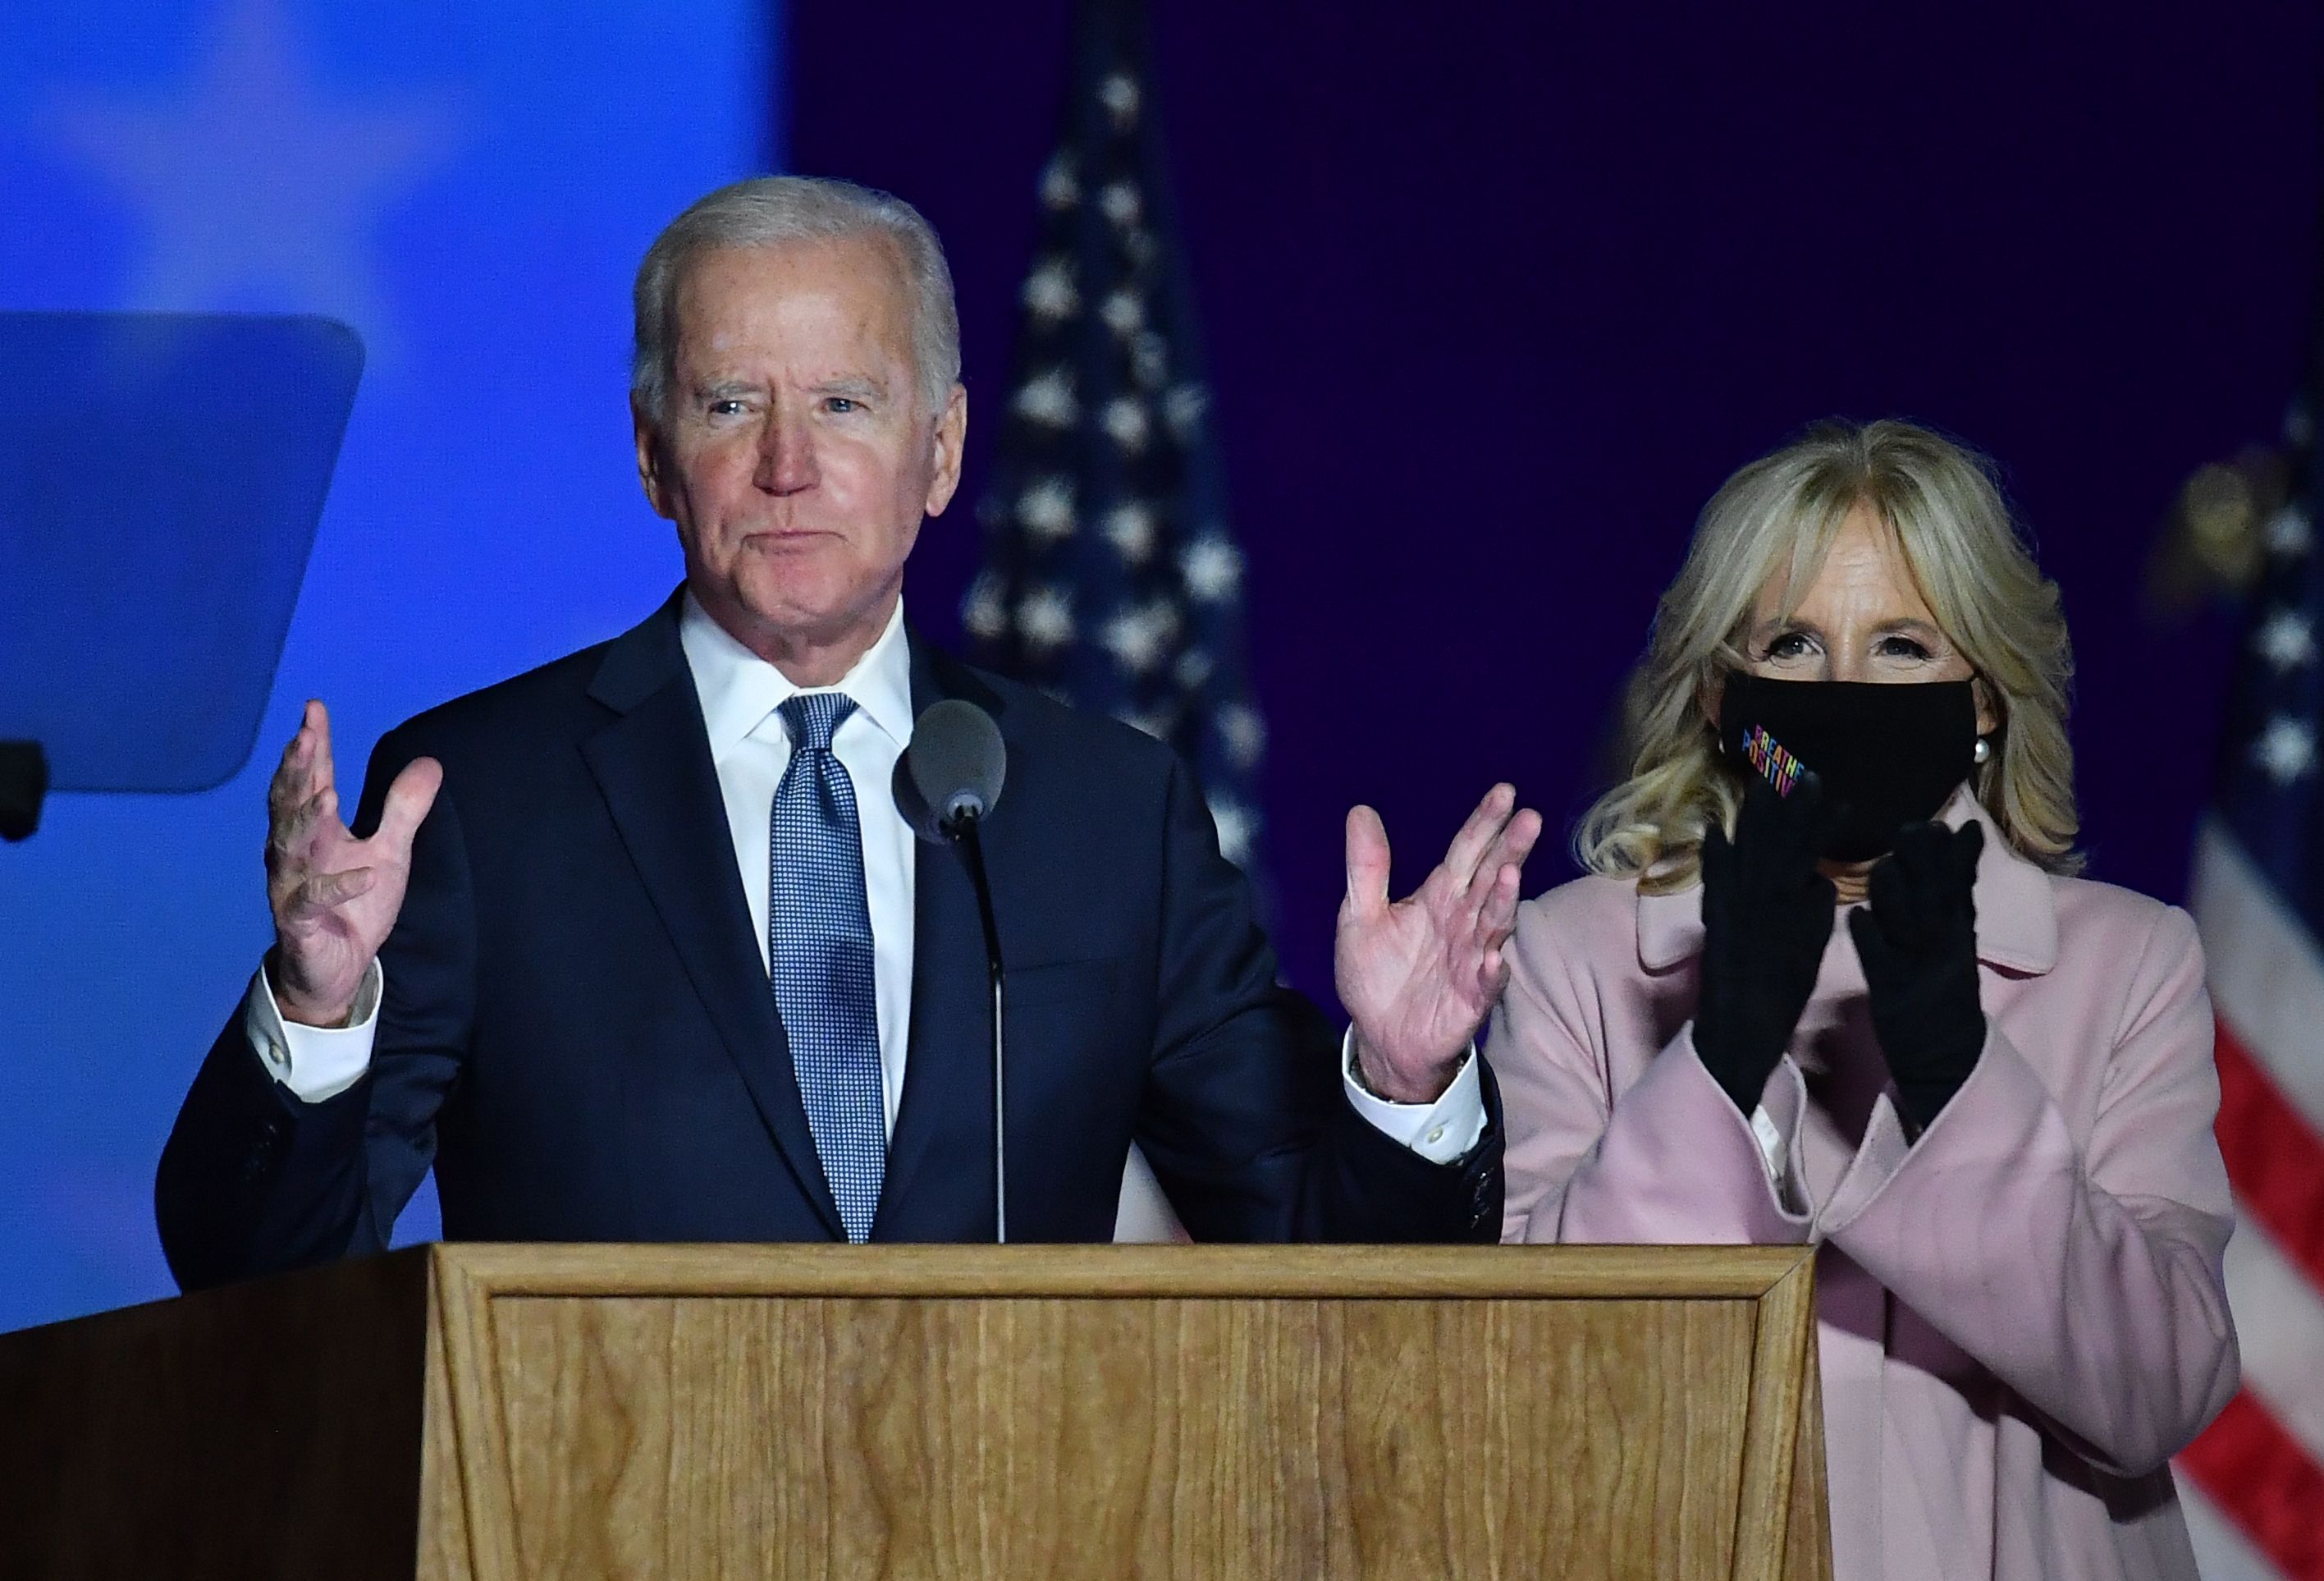 Democratic presidential nominee Joe Biden along with his wife Jill Biden speaks during election night at the Chase Center in Wilmington, Delaware, early on November 4